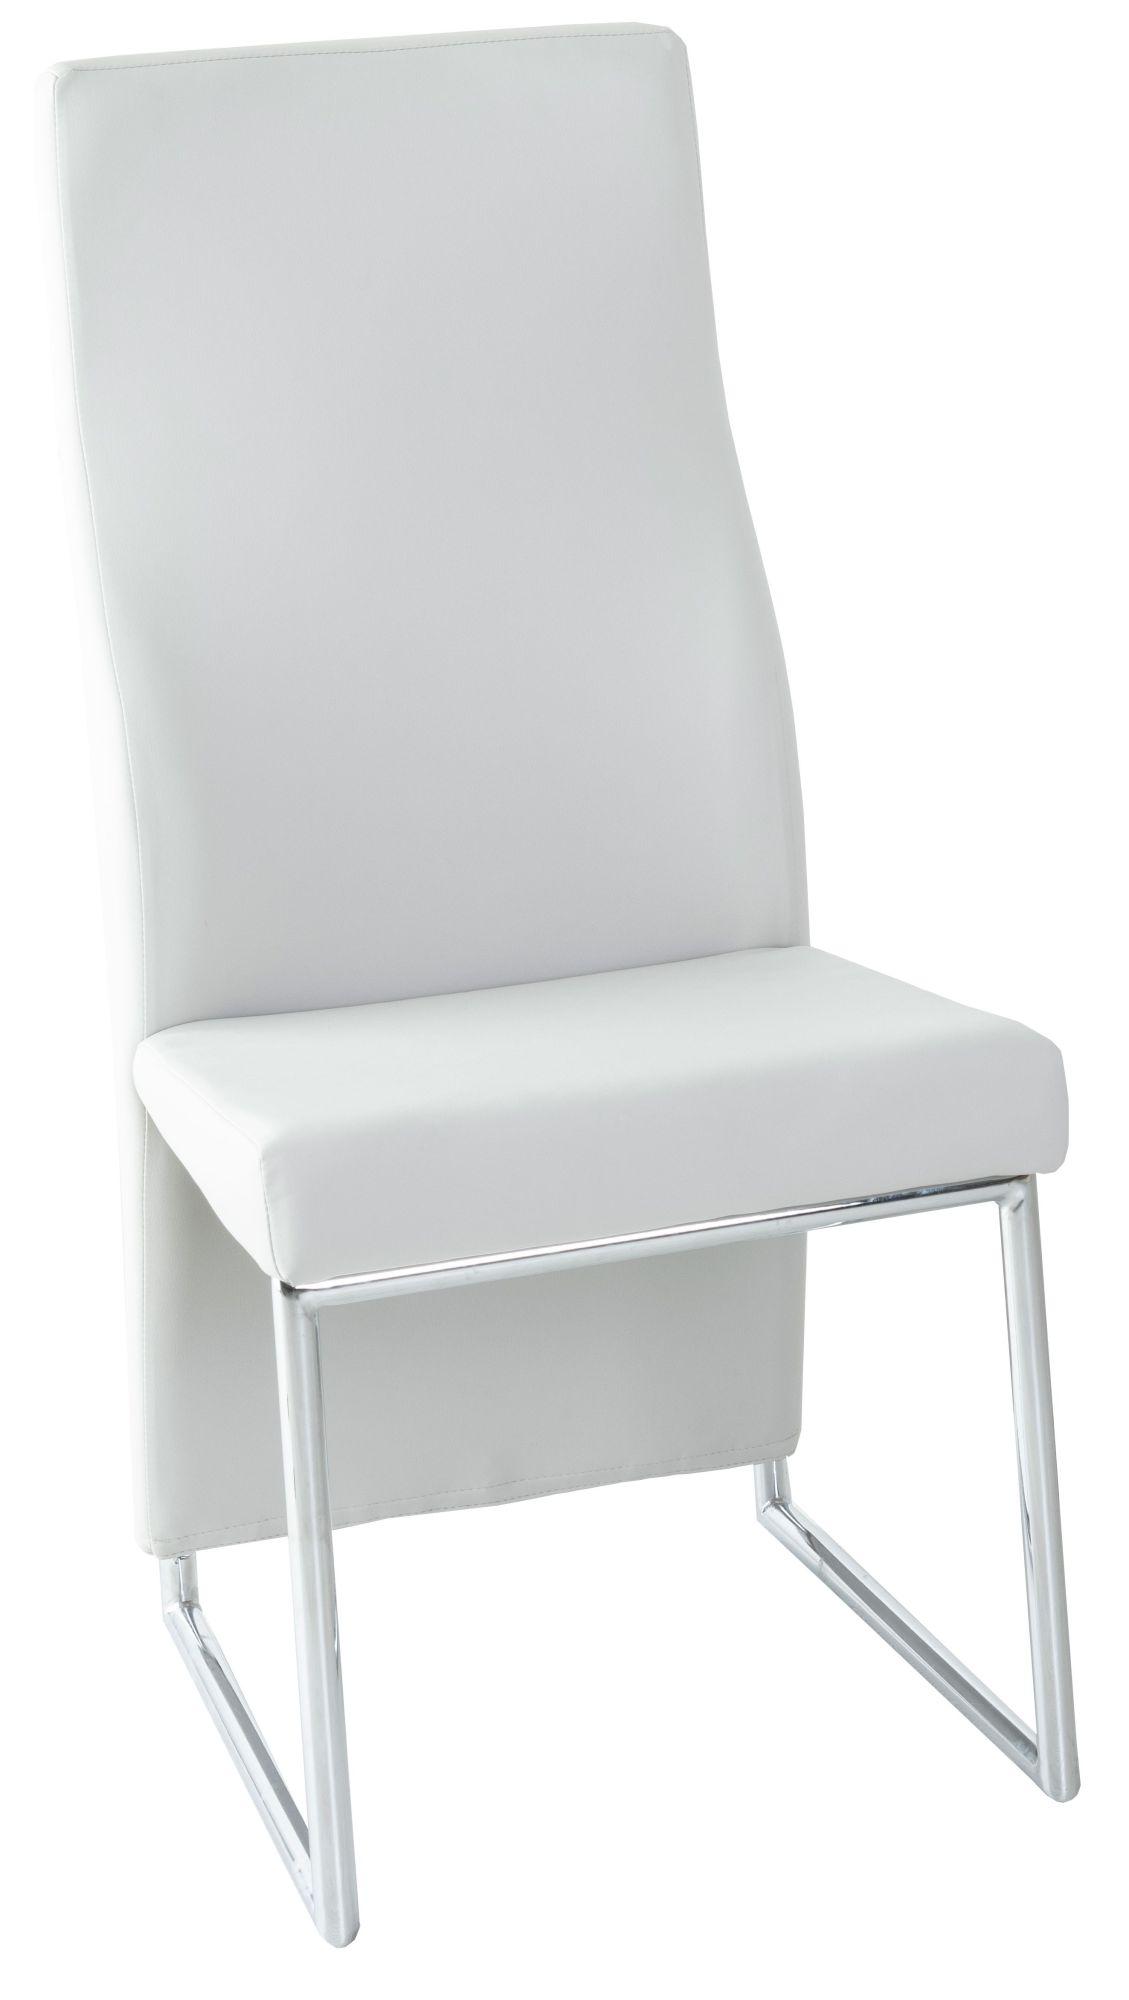 Perth Grey Dining Chair, Leather - Faux PU with High Back and Stainless Steel Chrome Base